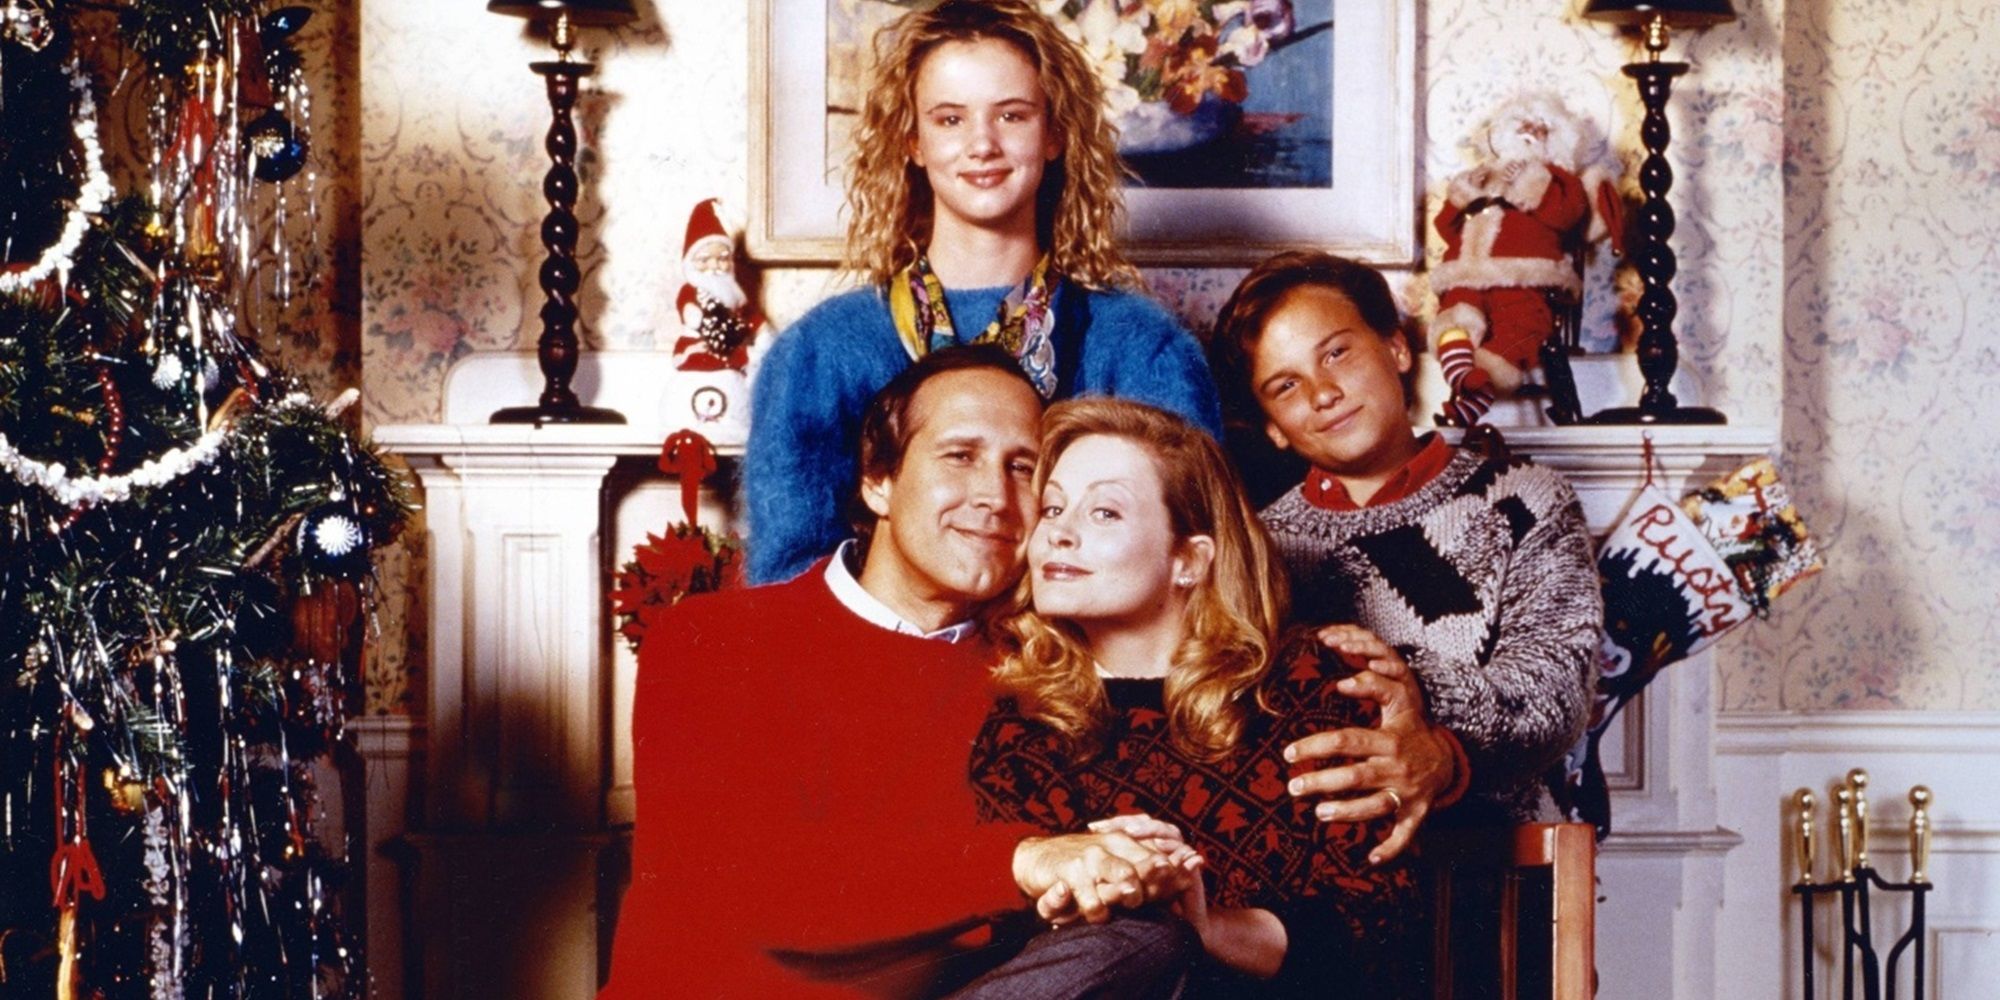 The Griswold family in Christmas Vacation